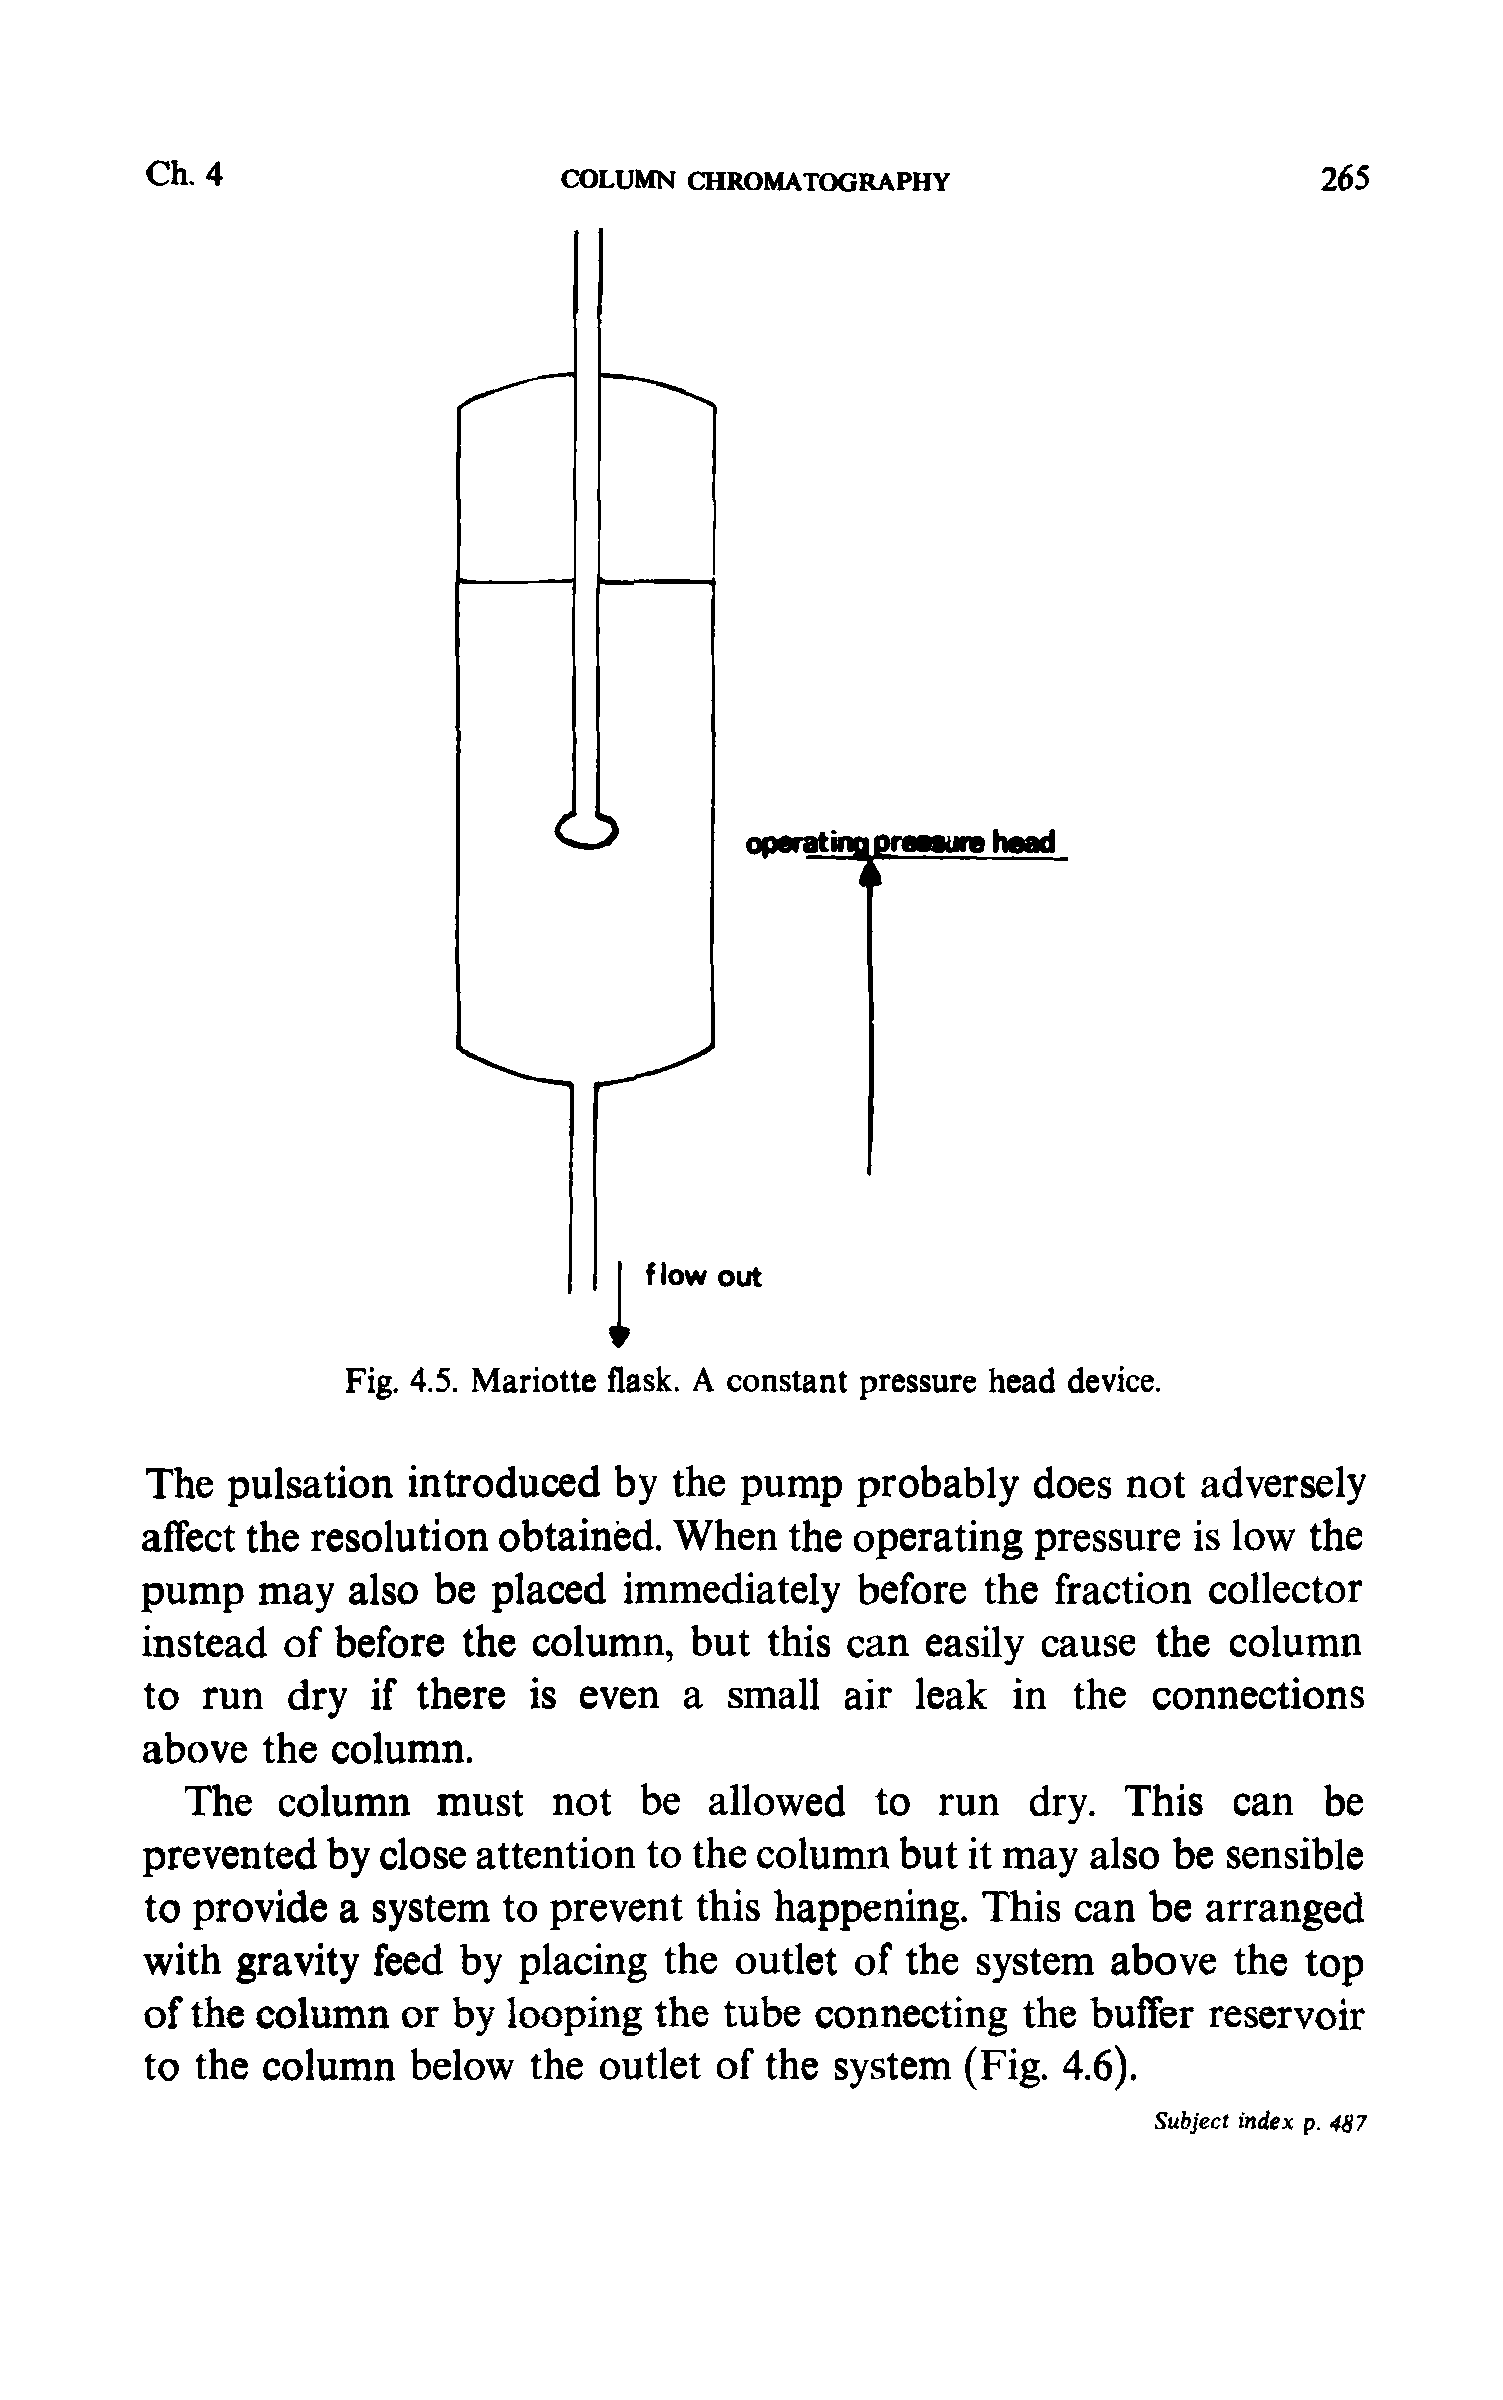 Fig. 4.5. Mariotte flask. A constant pressure head device.